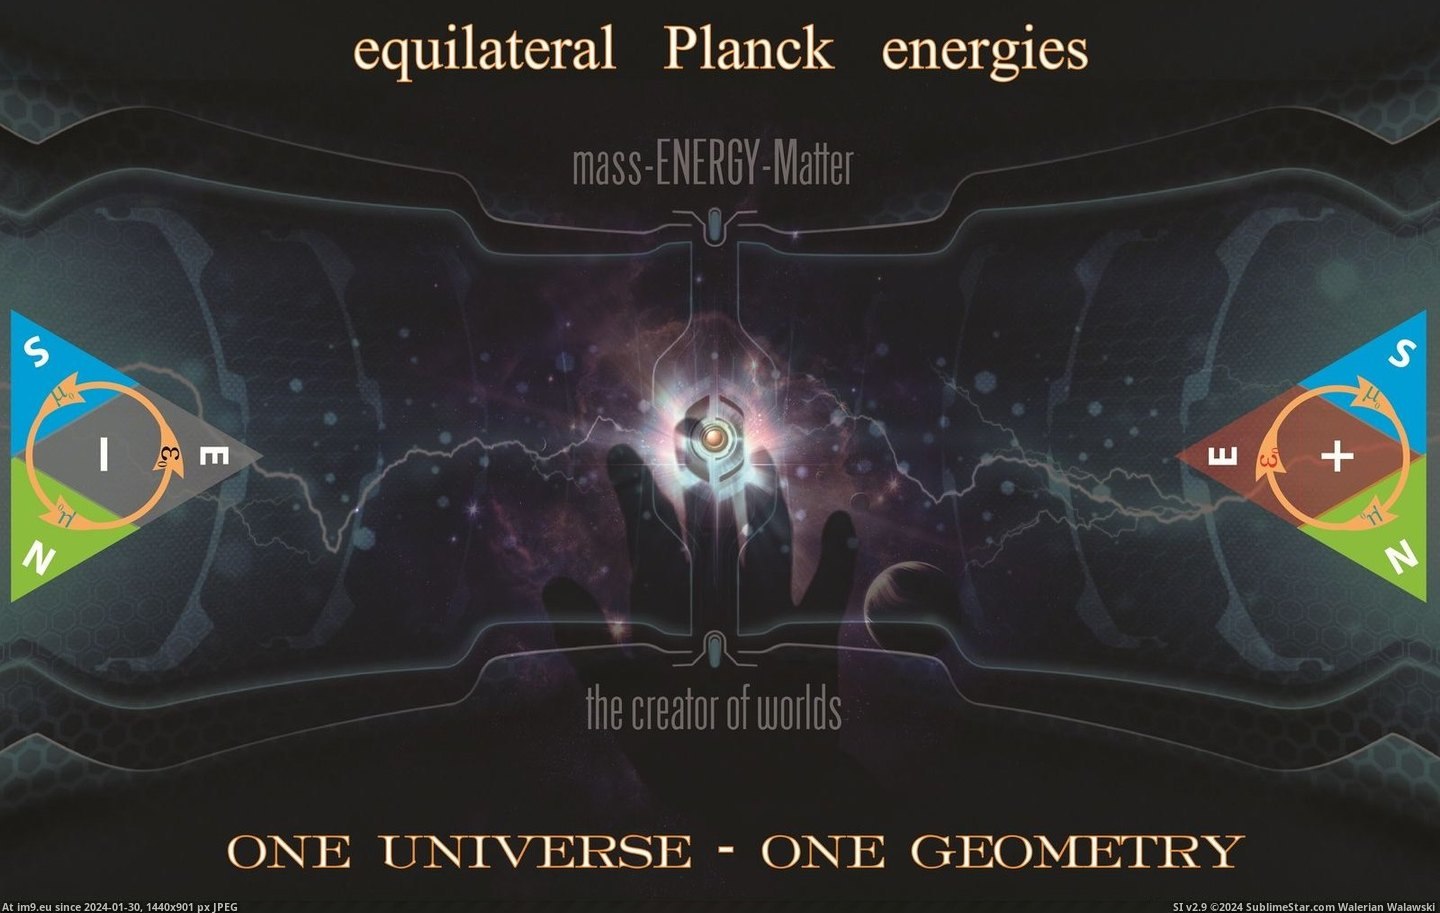 Equilateral Planck Energies [1600X1200] (in Mass Energy Matter)